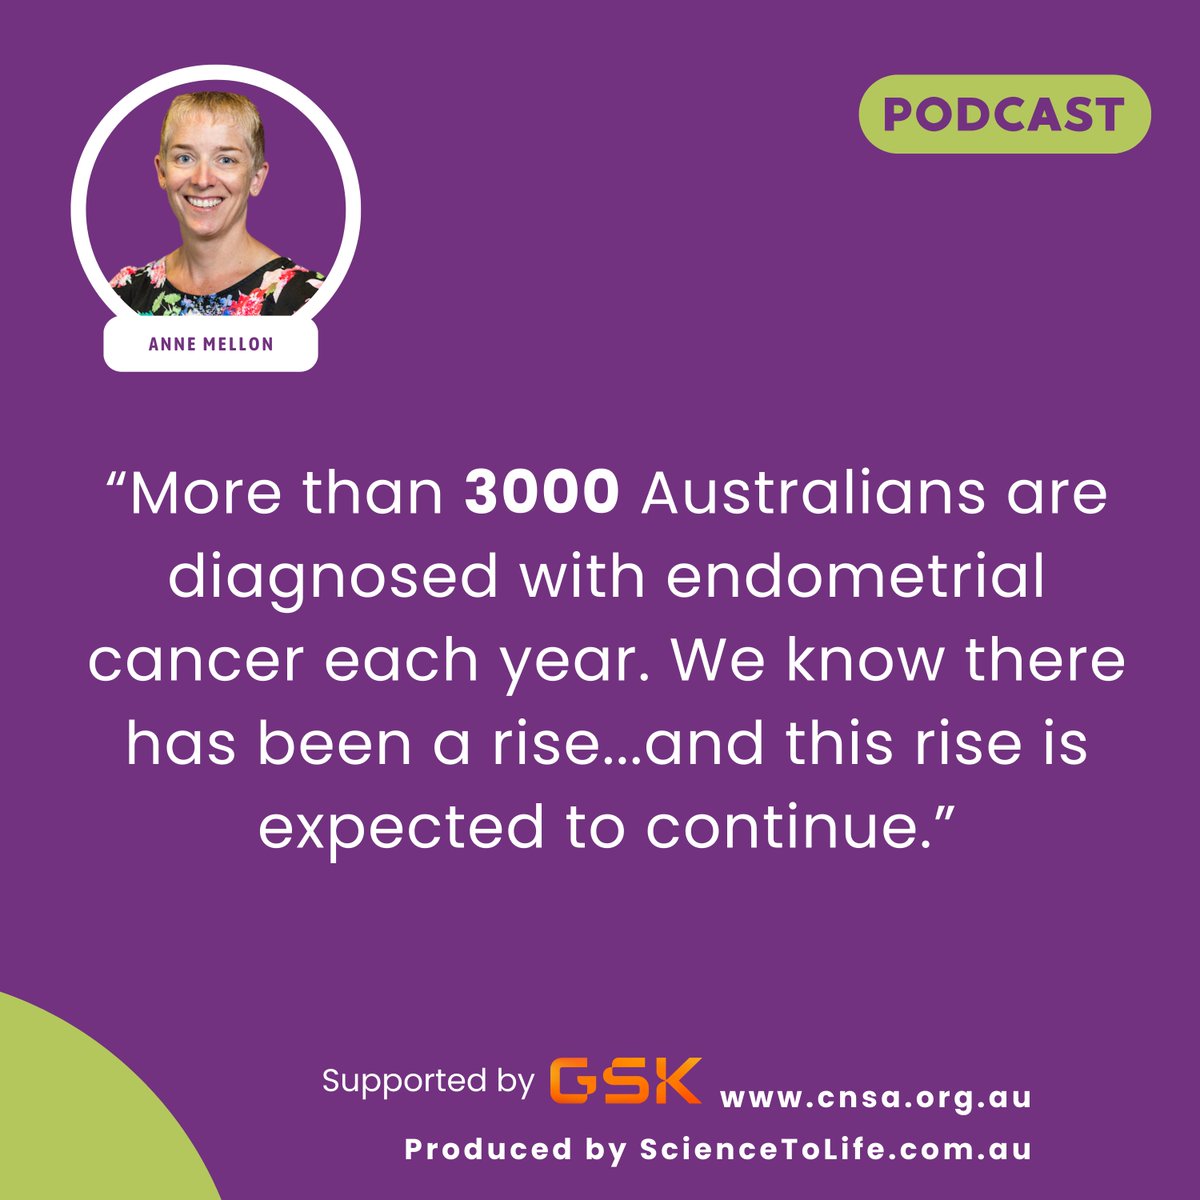 🎙 Out now! In this month's episode, we discuss The Evolving Treatment Landscape in Advanced #EndometrialCancer. Focussing on its impact on patients in Aus, recent treatment advancements, management of AE, and strategies in patient care. listen > bit.ly/3qINWtv